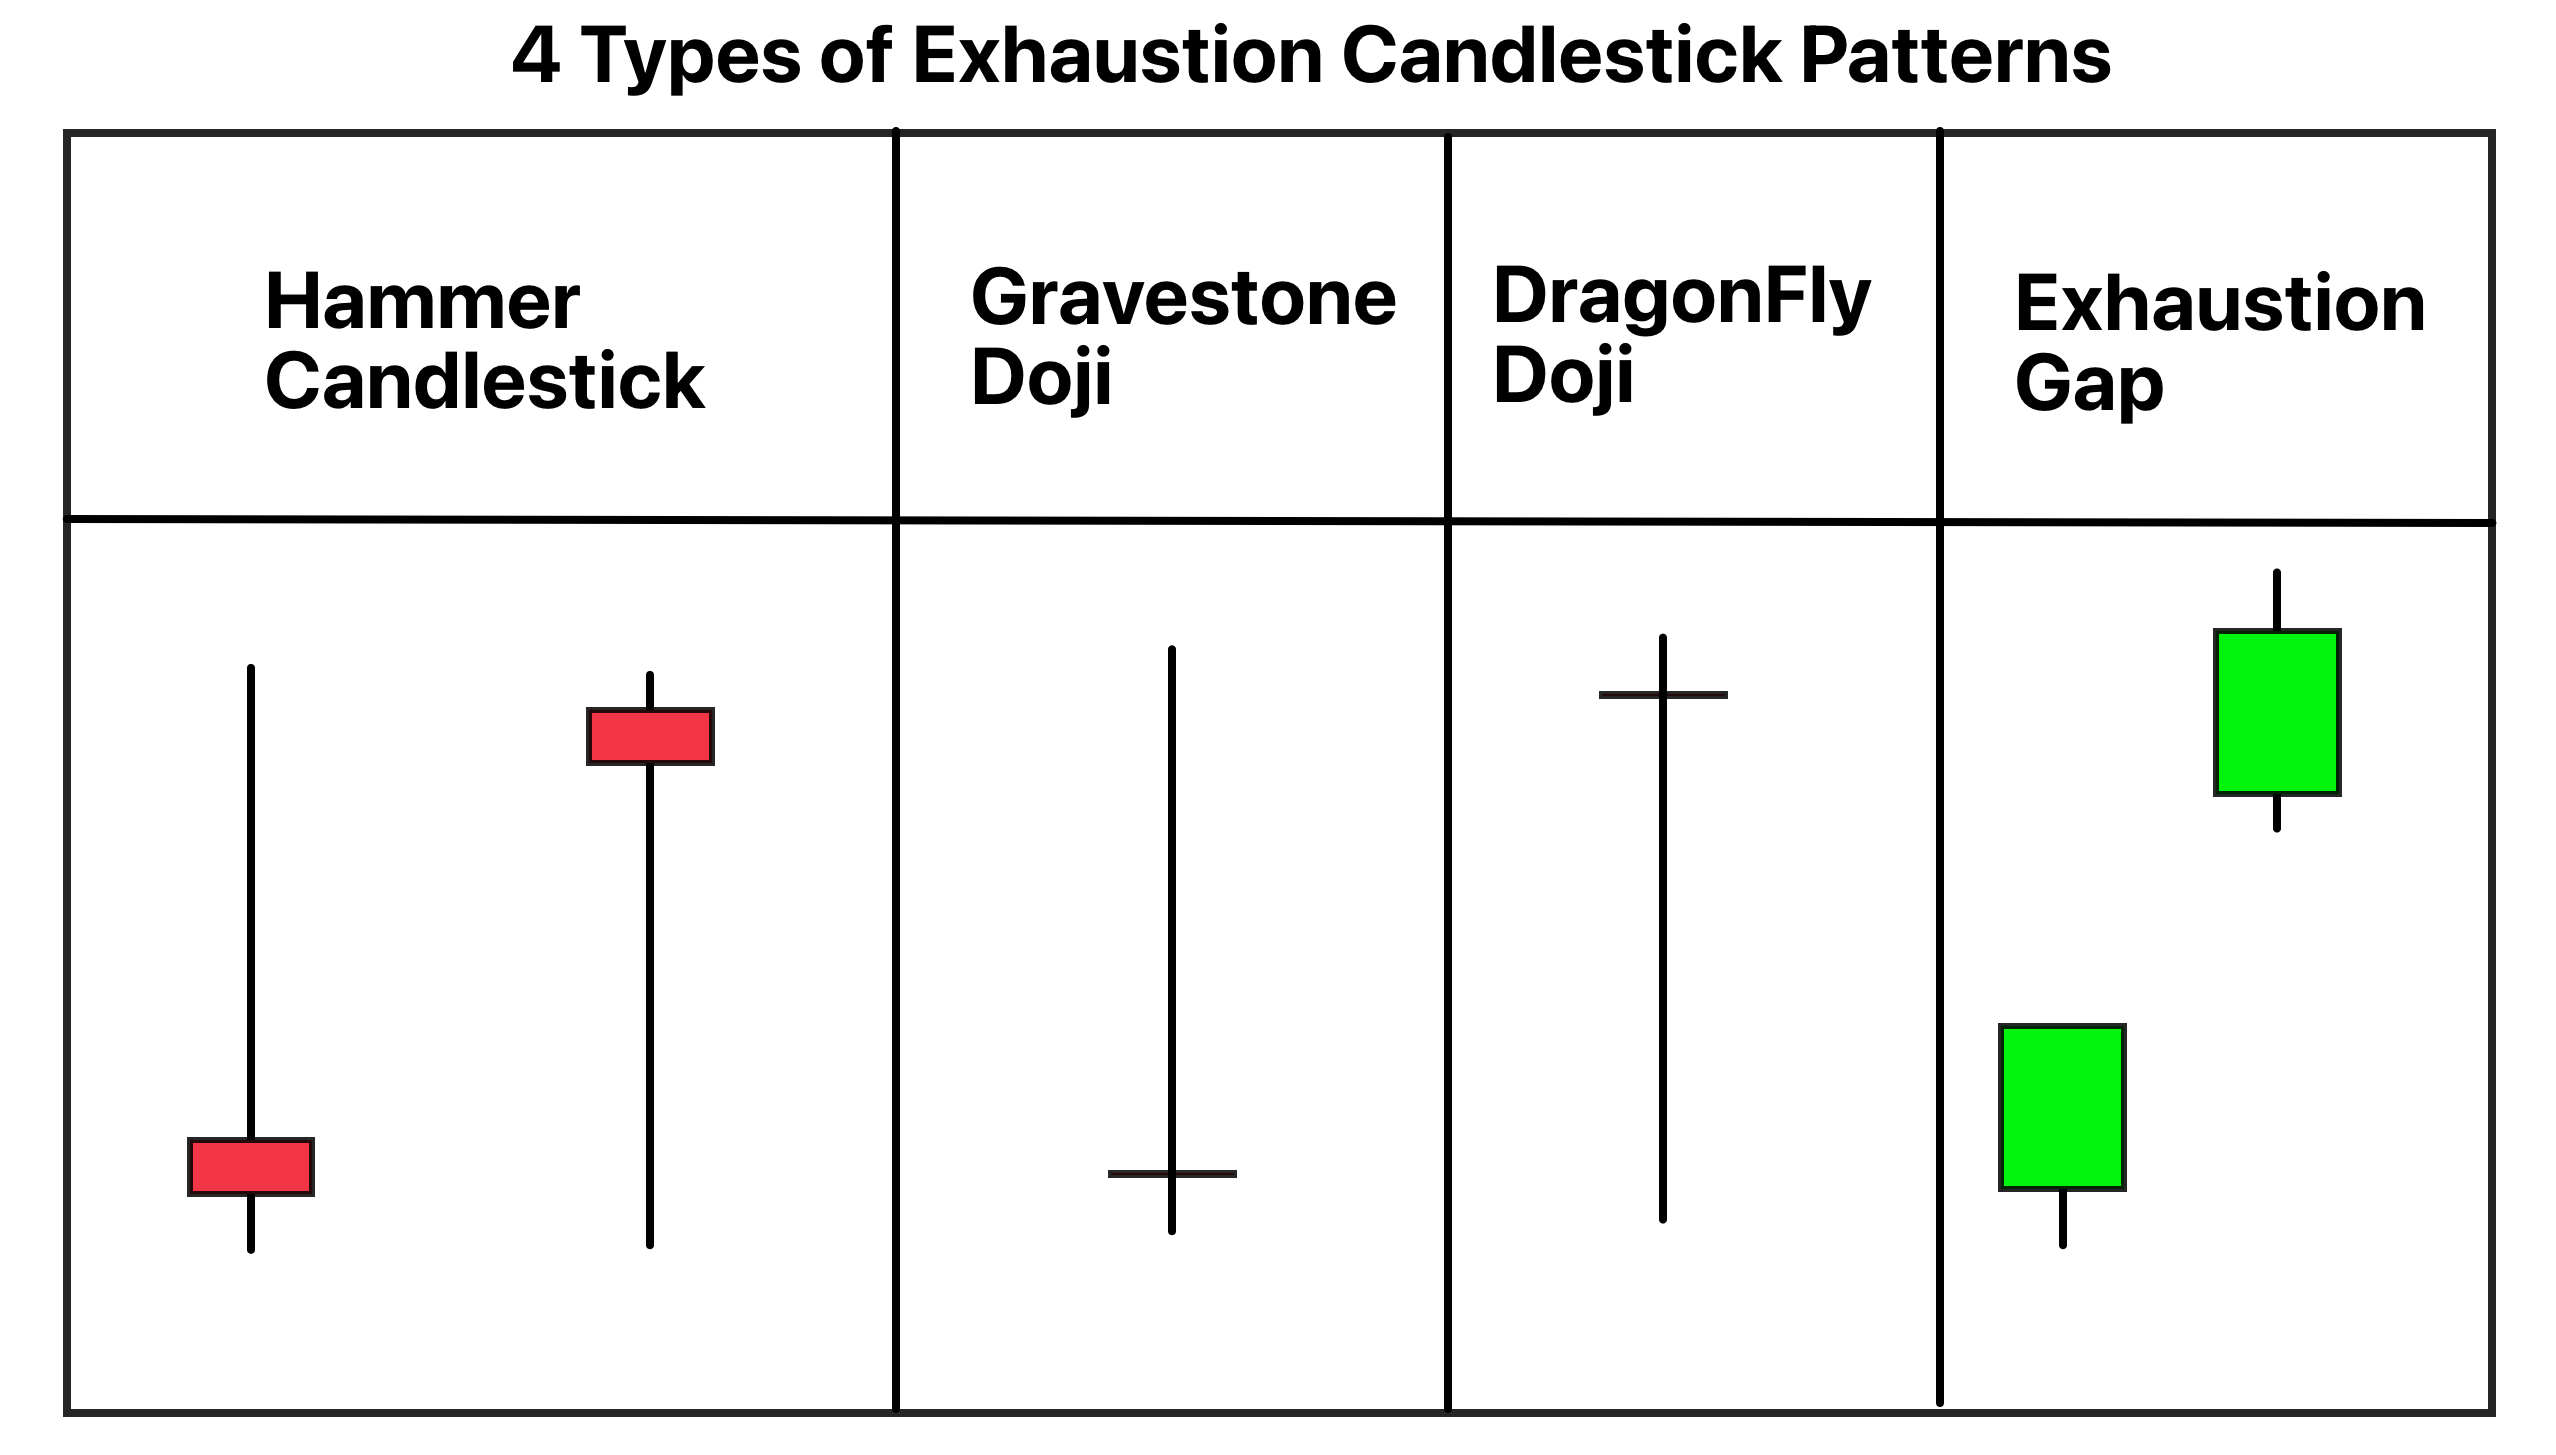 Exhaustion candlestick patterns